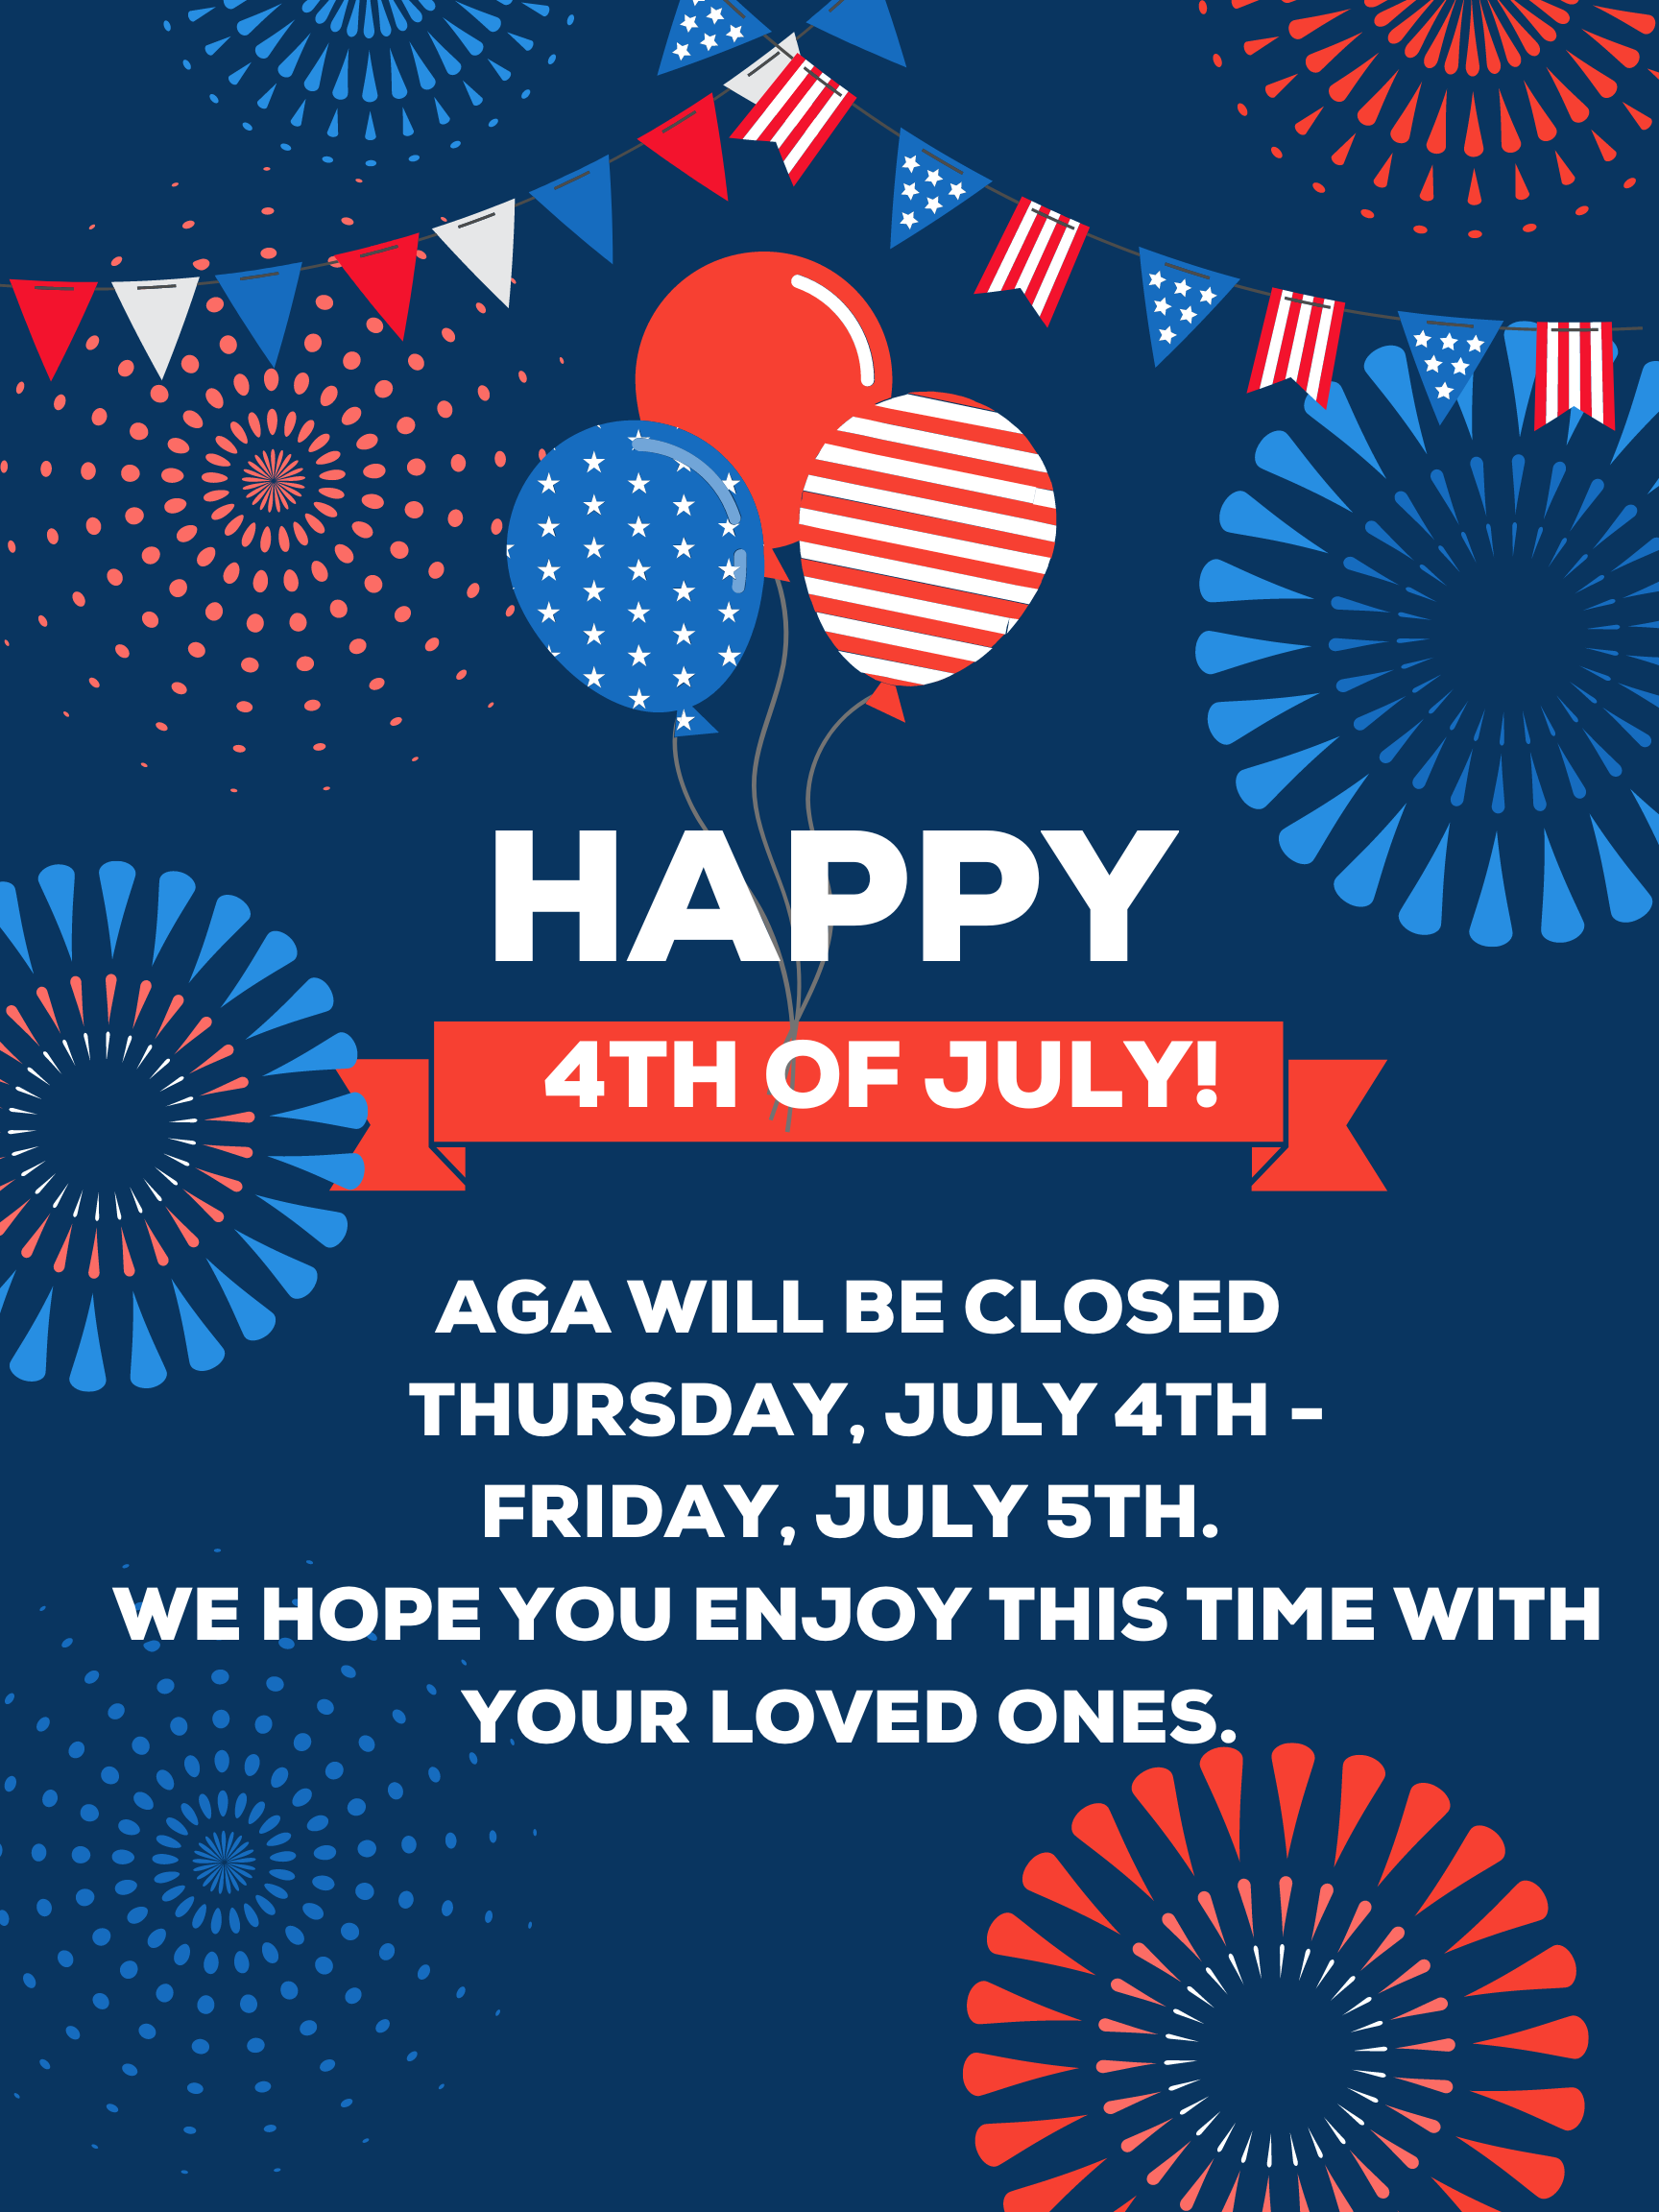 Blue_And_Red_Happy_4th_of_July_Poster_(1)[1].png